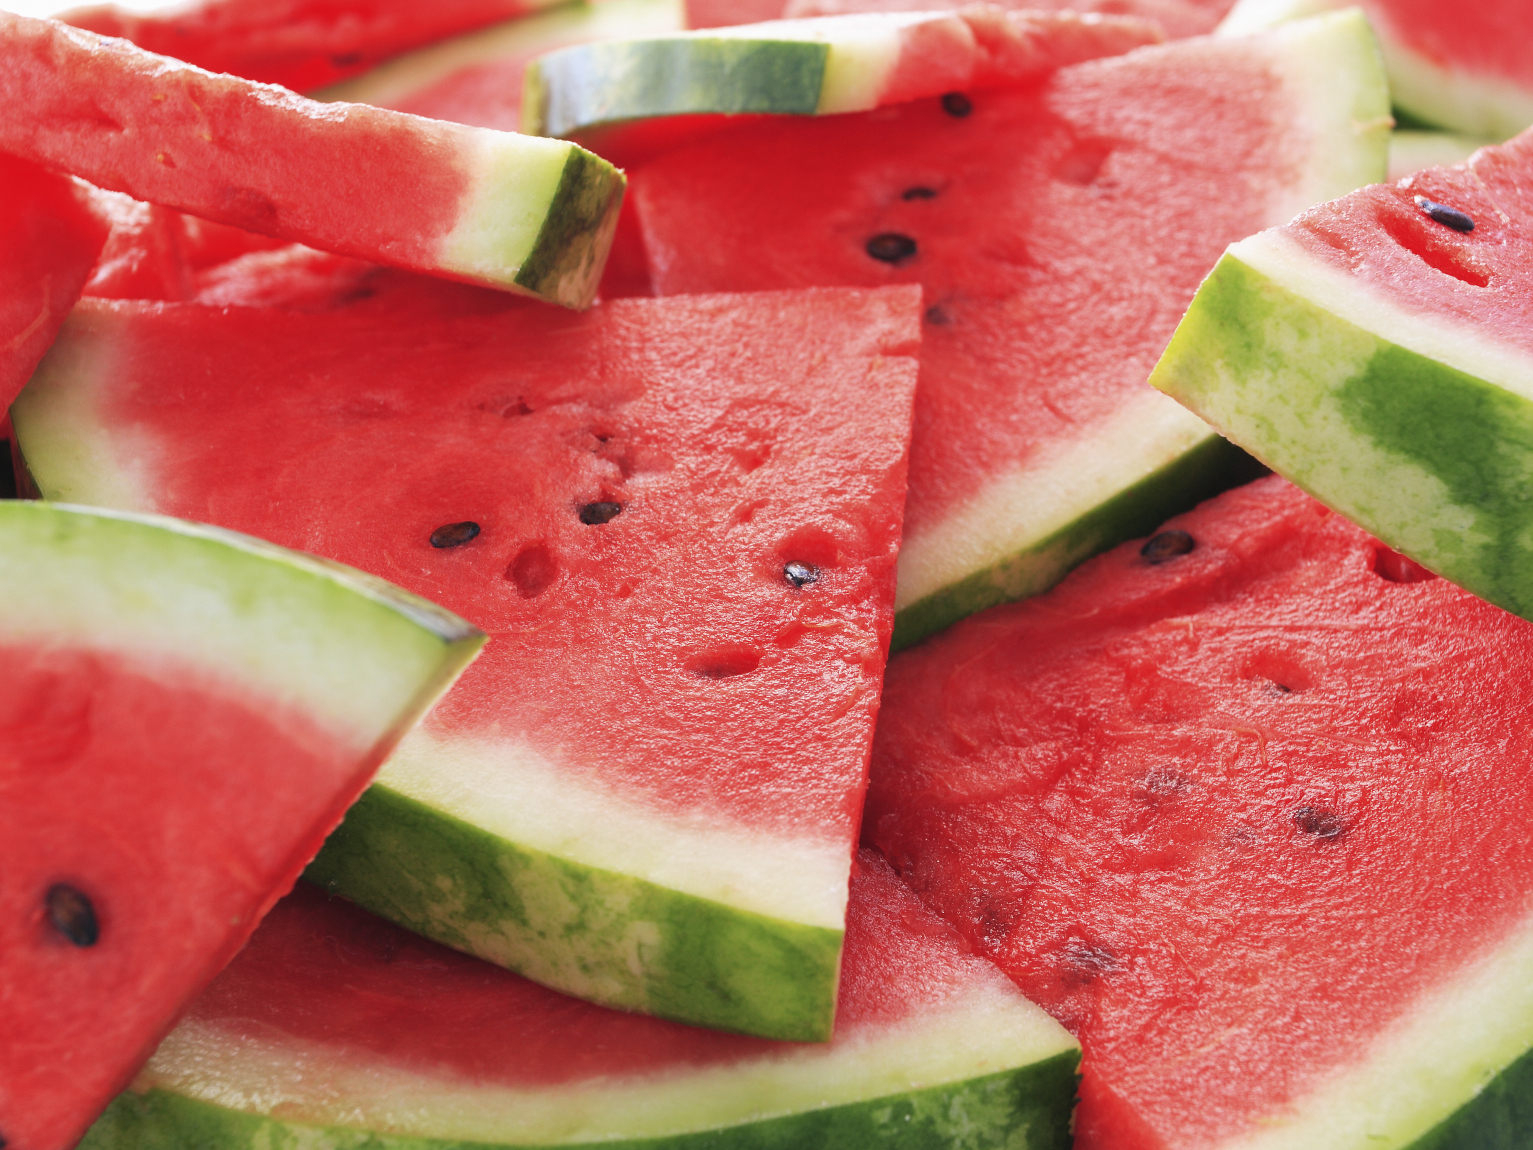 Watermelon and its poisonous effects